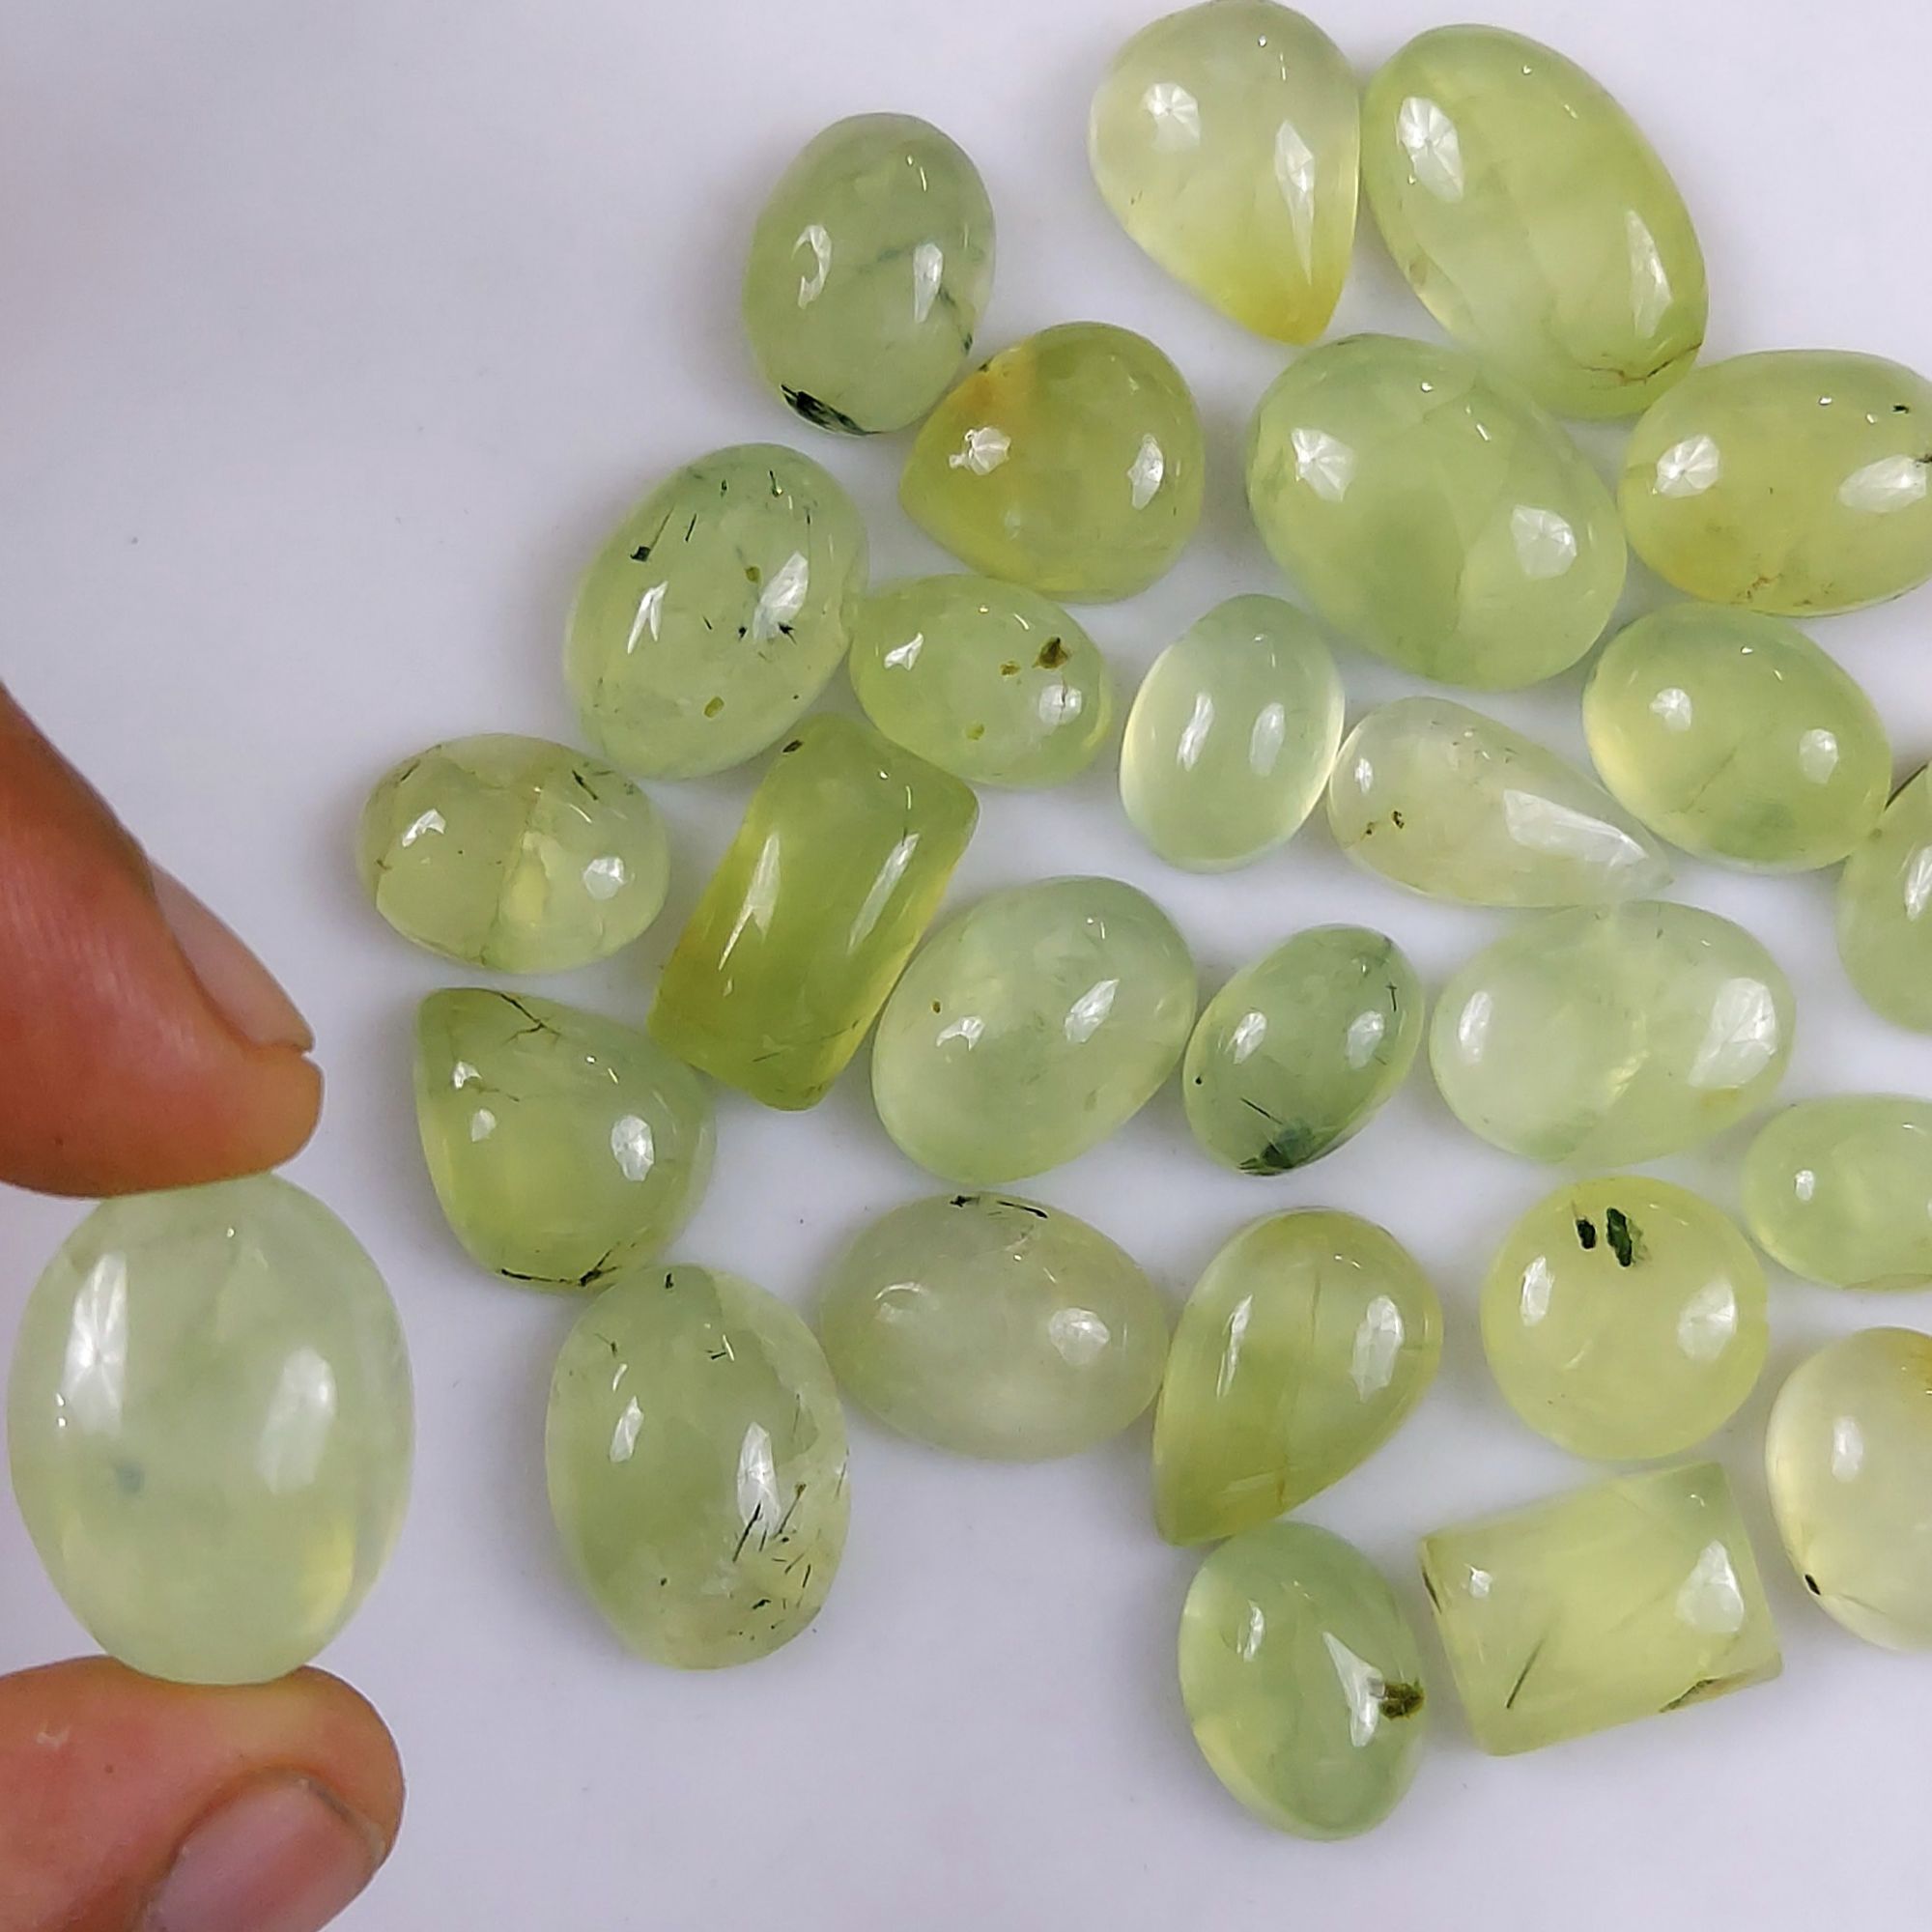 27Pcs 362Cts Natural Green Prehnite Loose Cabochon Gemstone Lot For Jewelry Making  18x12 12x8mm#1241